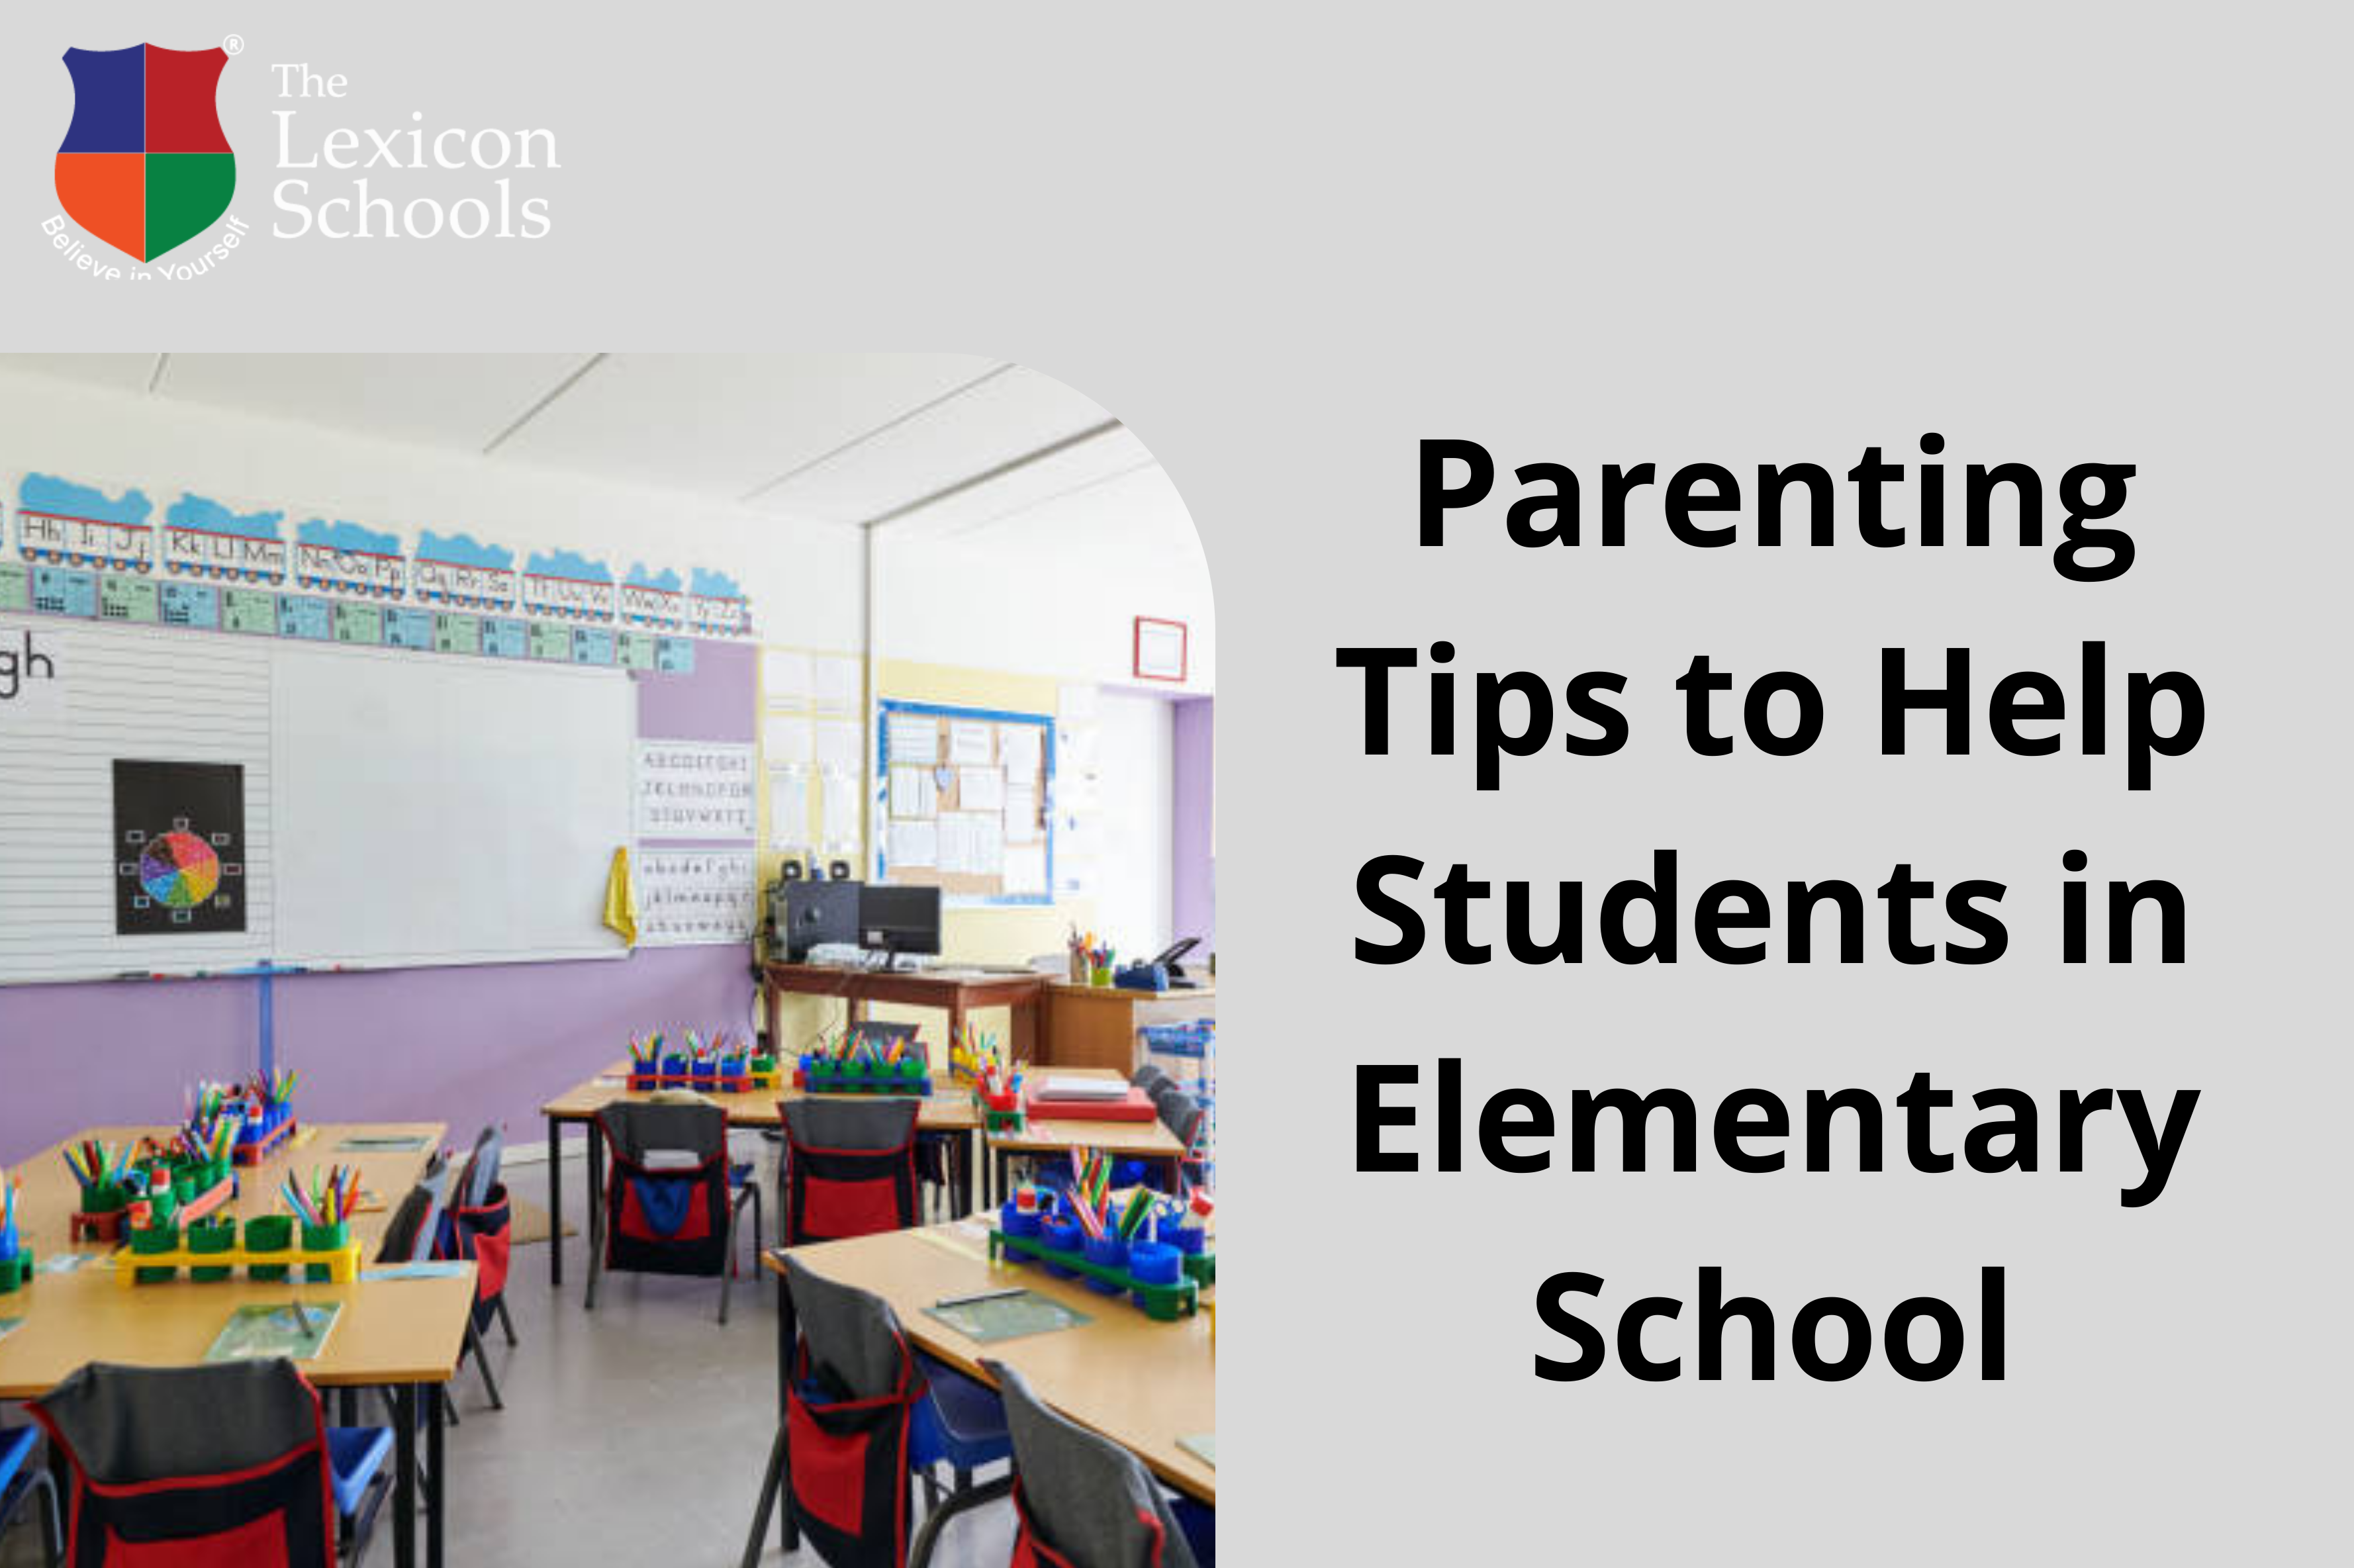 10 Parenting Tips to Help Students in Elementary School